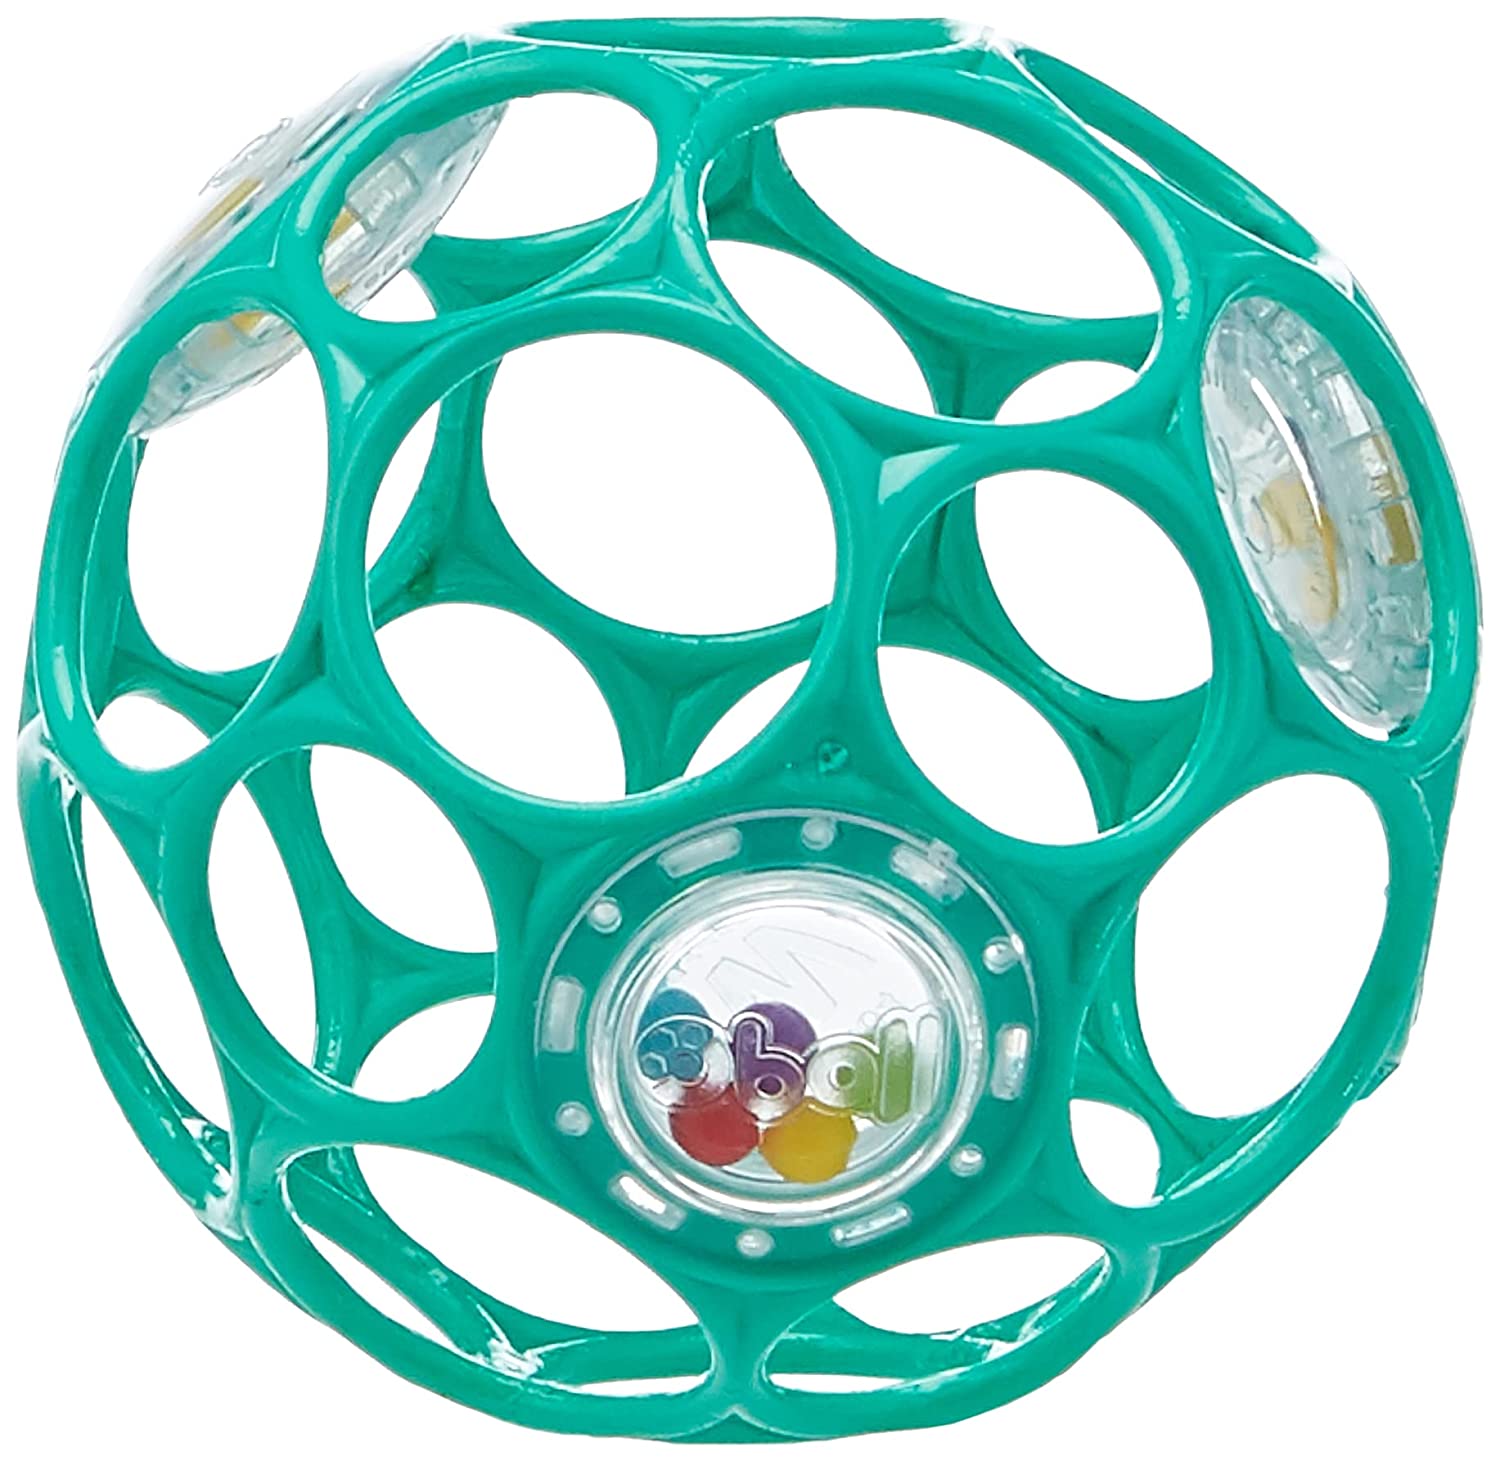 Bright Starts Oball Rattle Easy-Grasp Toy, Teal - 4", Ages Newborn Plus